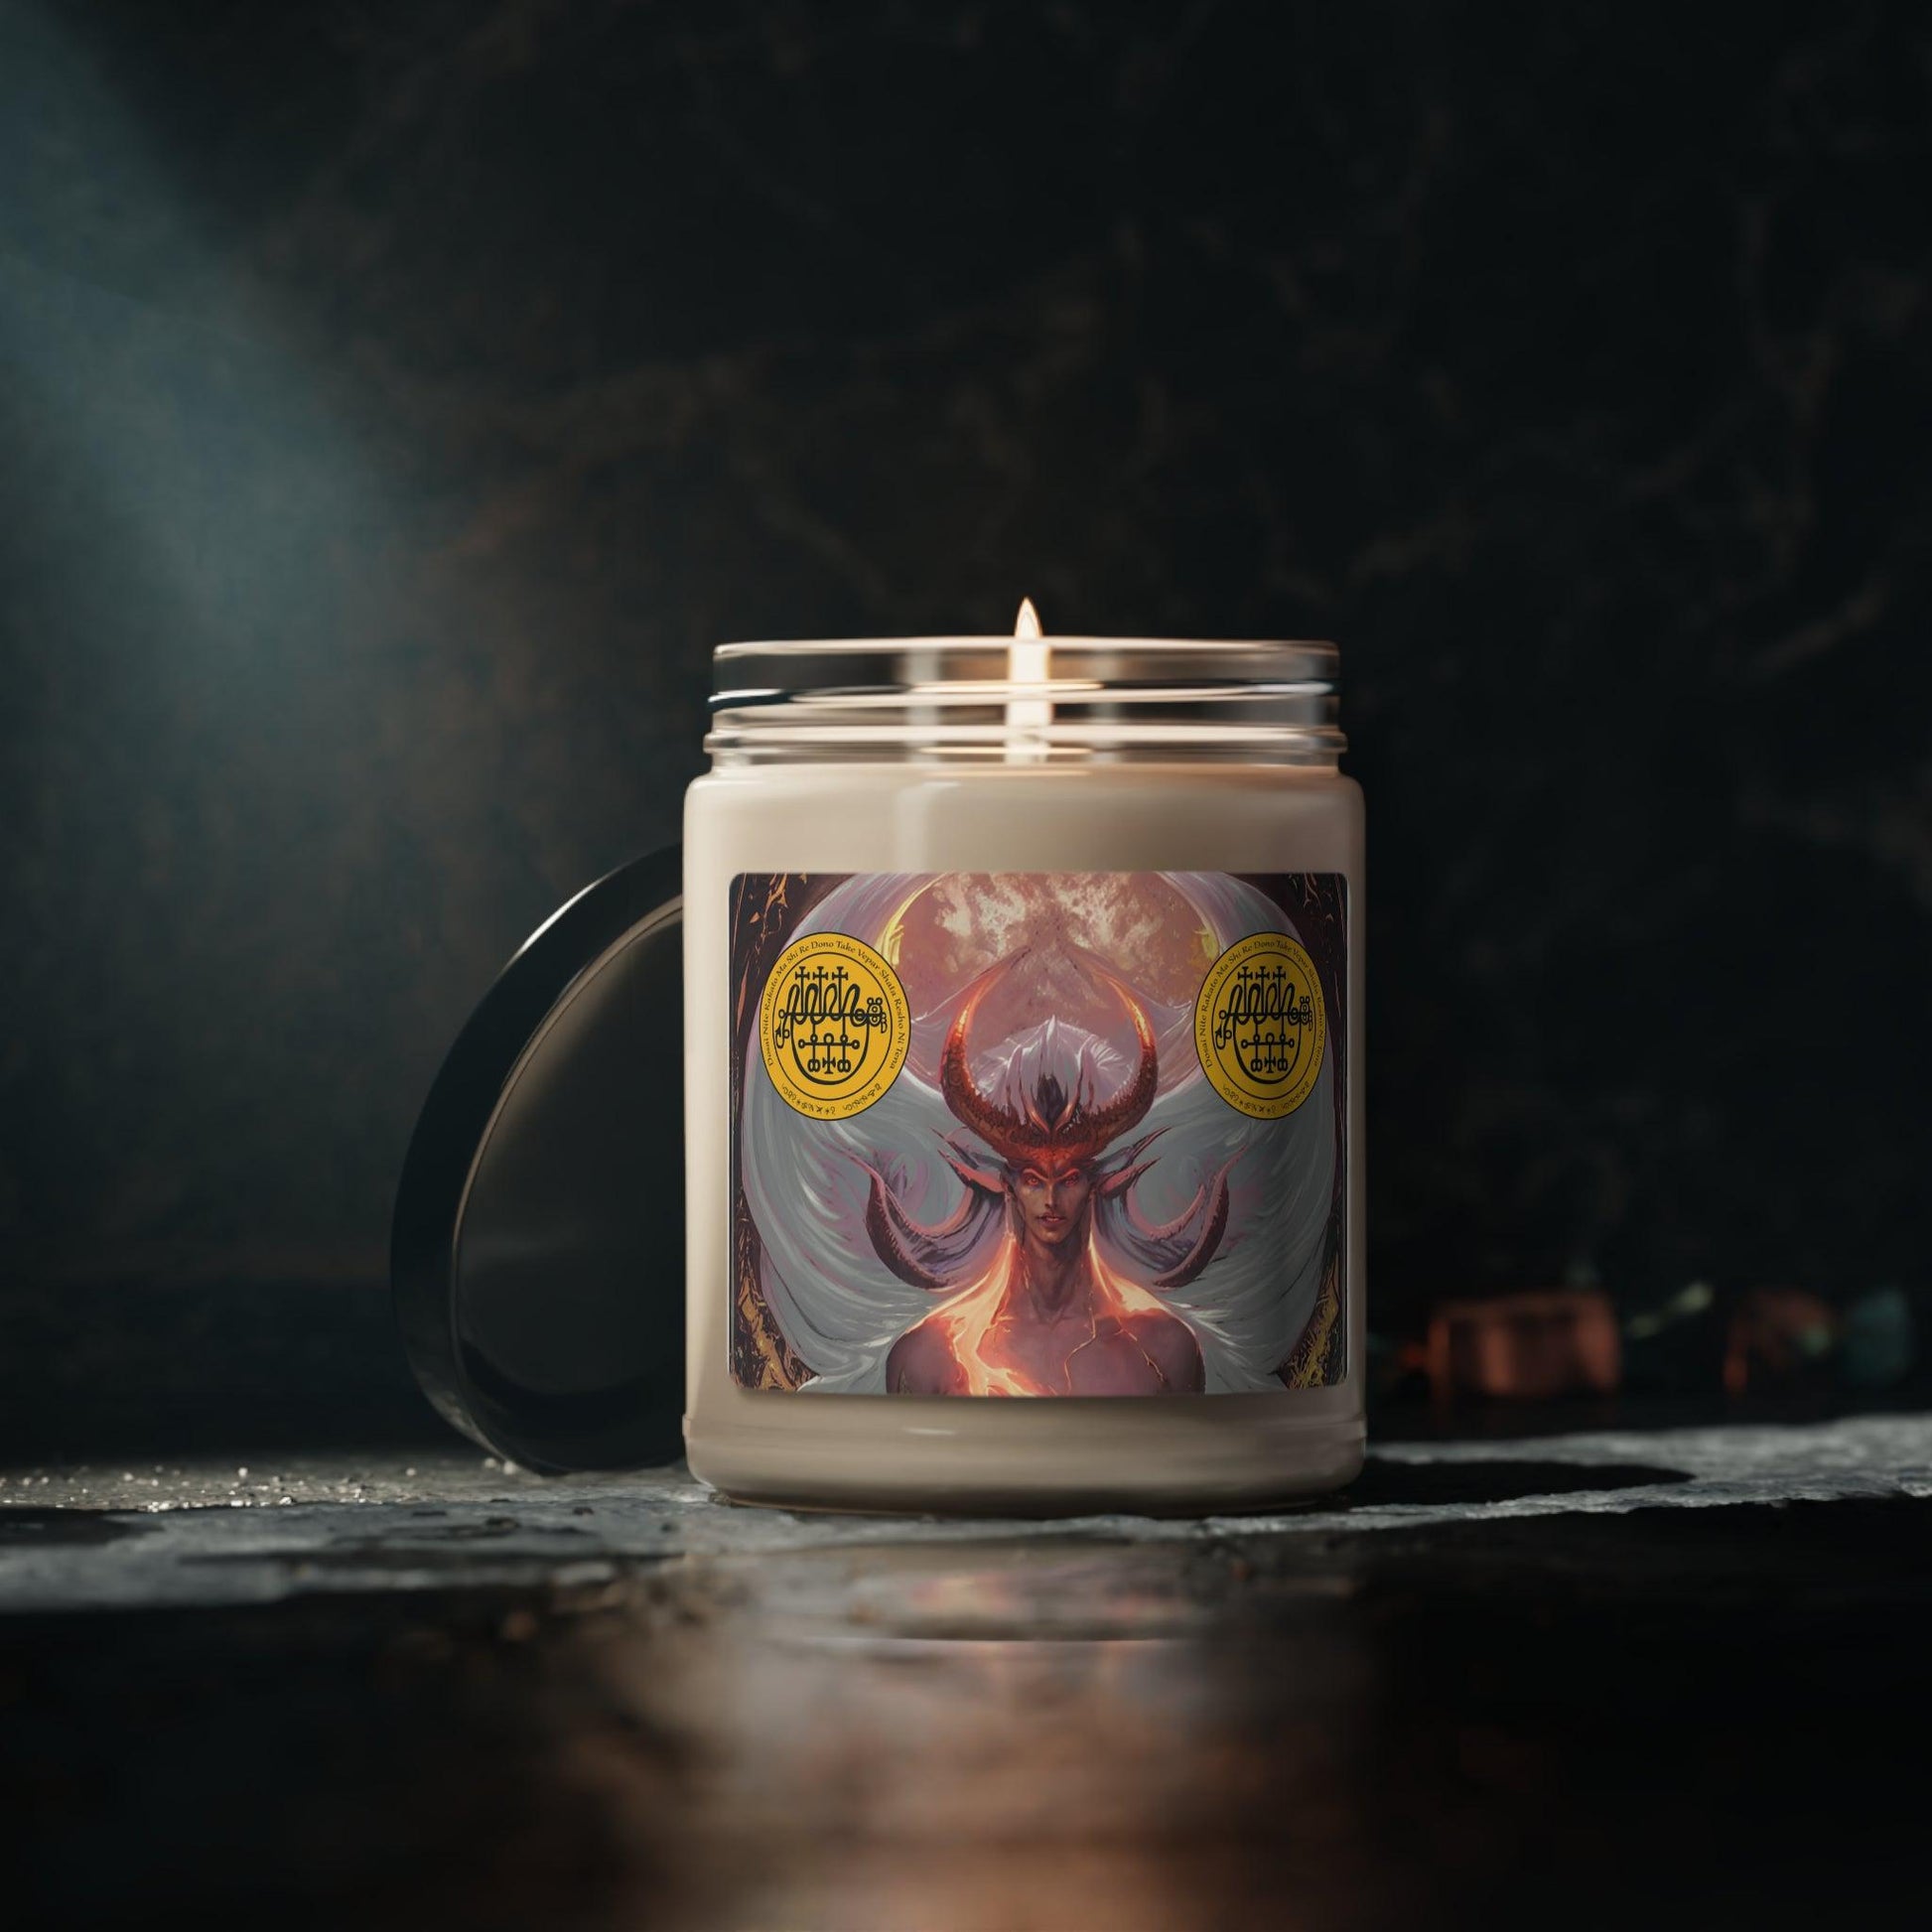 Demon-Vepar-Altar-Scented-Soy-Candle-for-offerings-rituals-initiations-or-praying-and-meditation-25